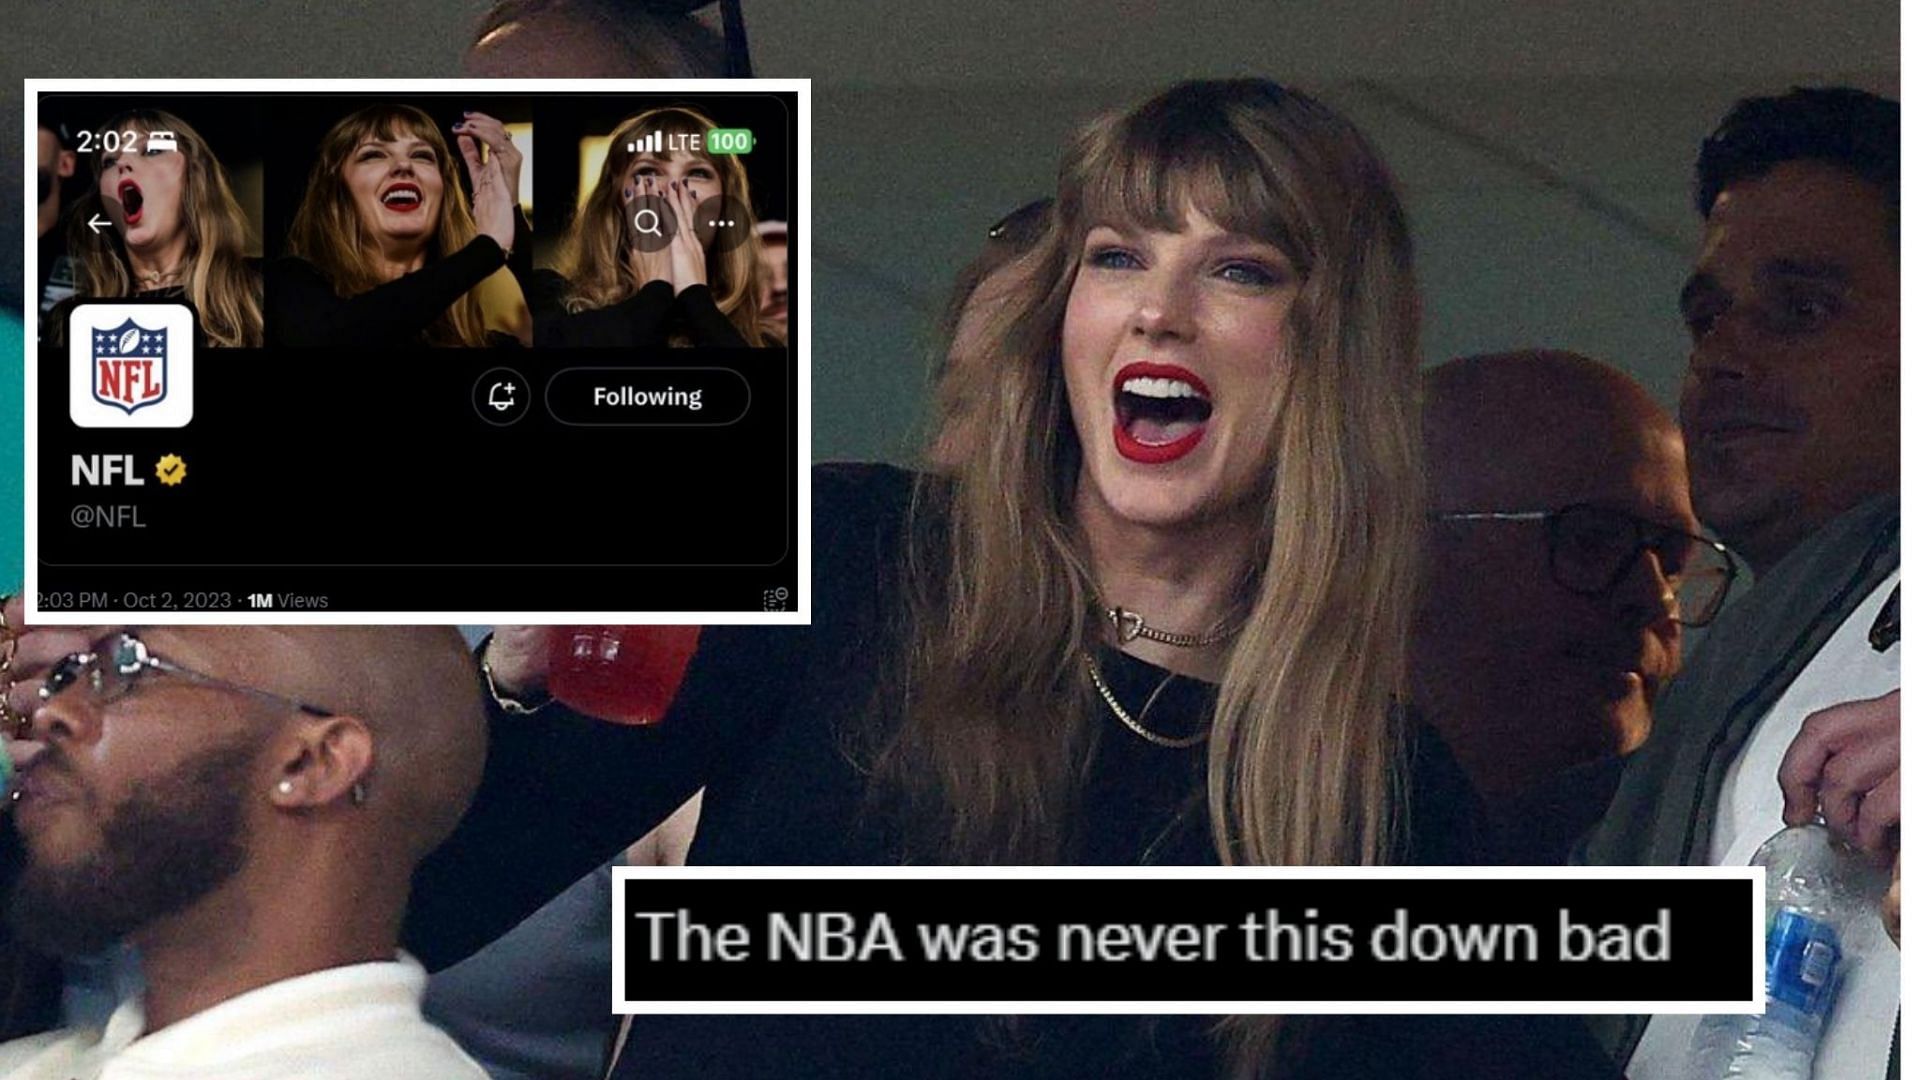 The NBA was never down this bad': Taylor Swift x NFL collaboration